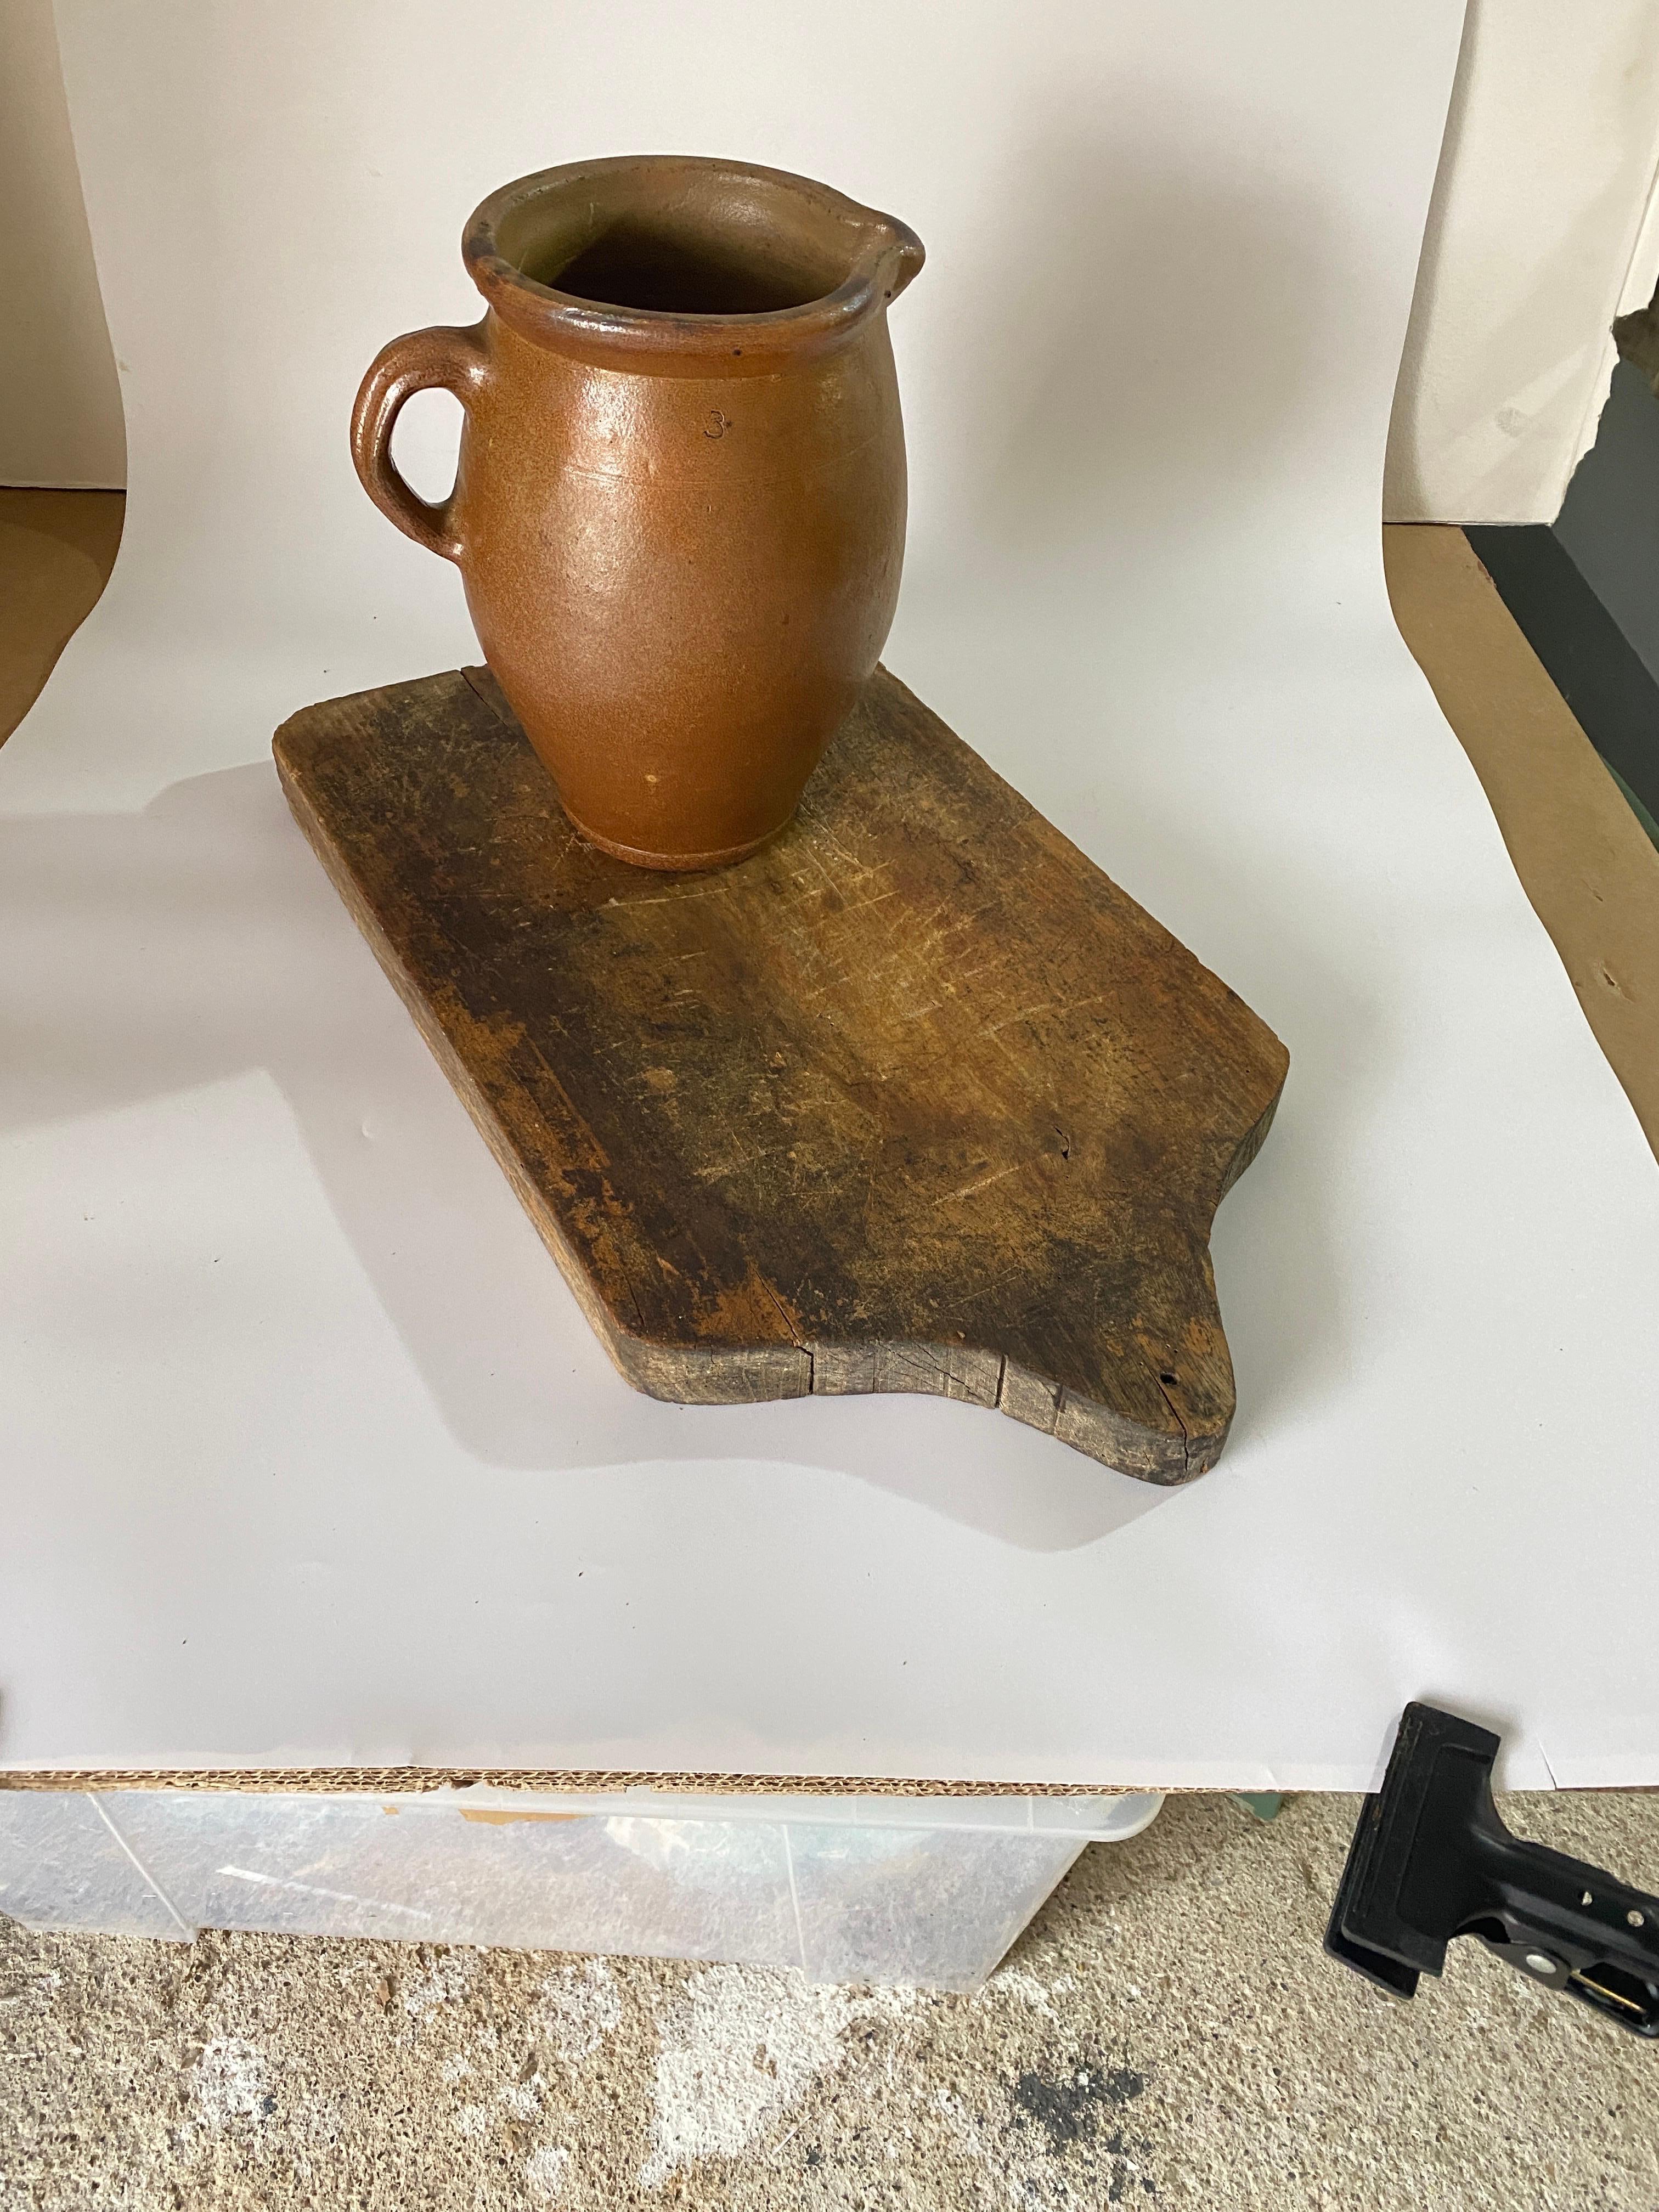 Wooden cutting board, with its old patina. It is an object of the French 19th century, in the style of French Provincial which is brown in color, and in a condition consistent with its age and use.